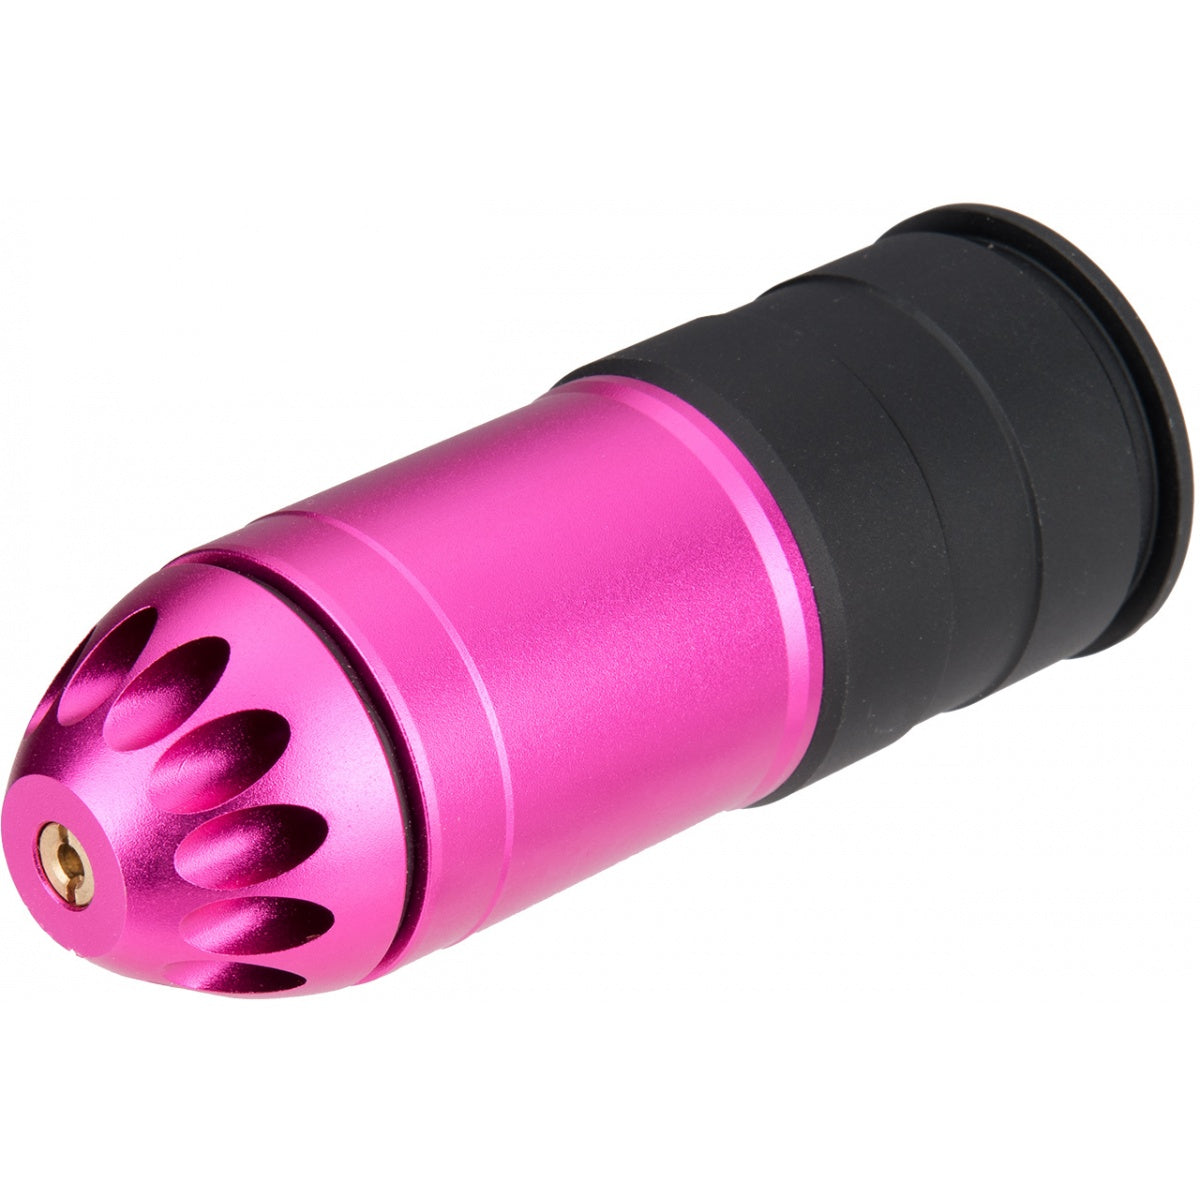 Sentinel Gears 120rd Grenade Shell for 40mm Airsoft Grenade Launchers - BLACK / PINK - ssairsoft